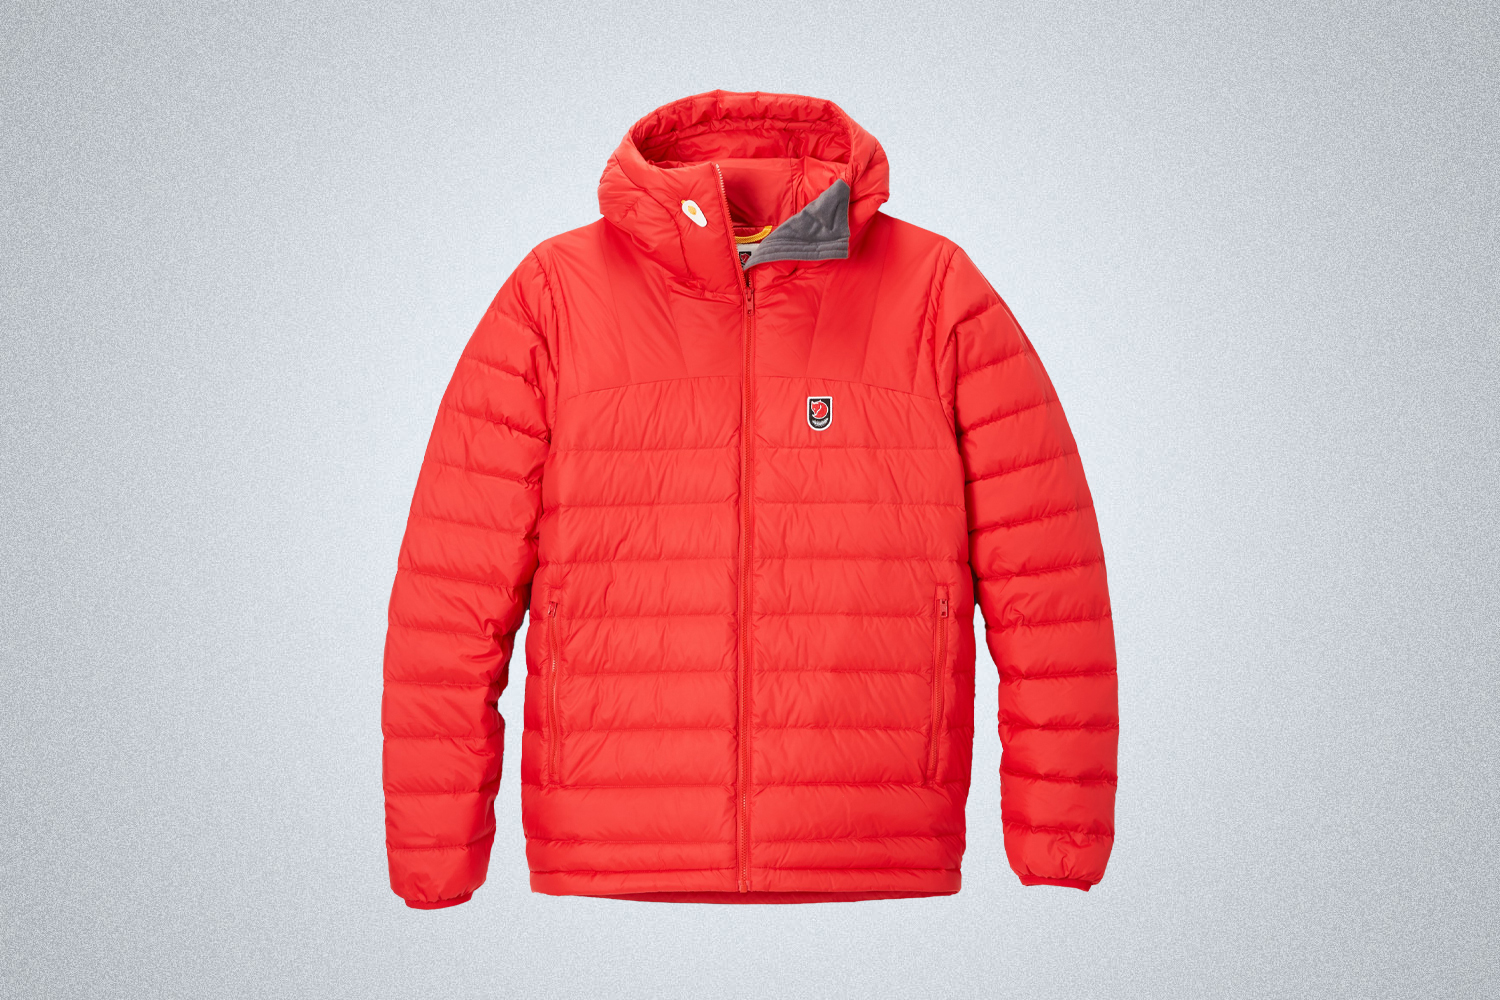 The Fjallraven Expedition Down Parka is the best parka and Fjallraven is the best outdoor brand for short guys in 2022